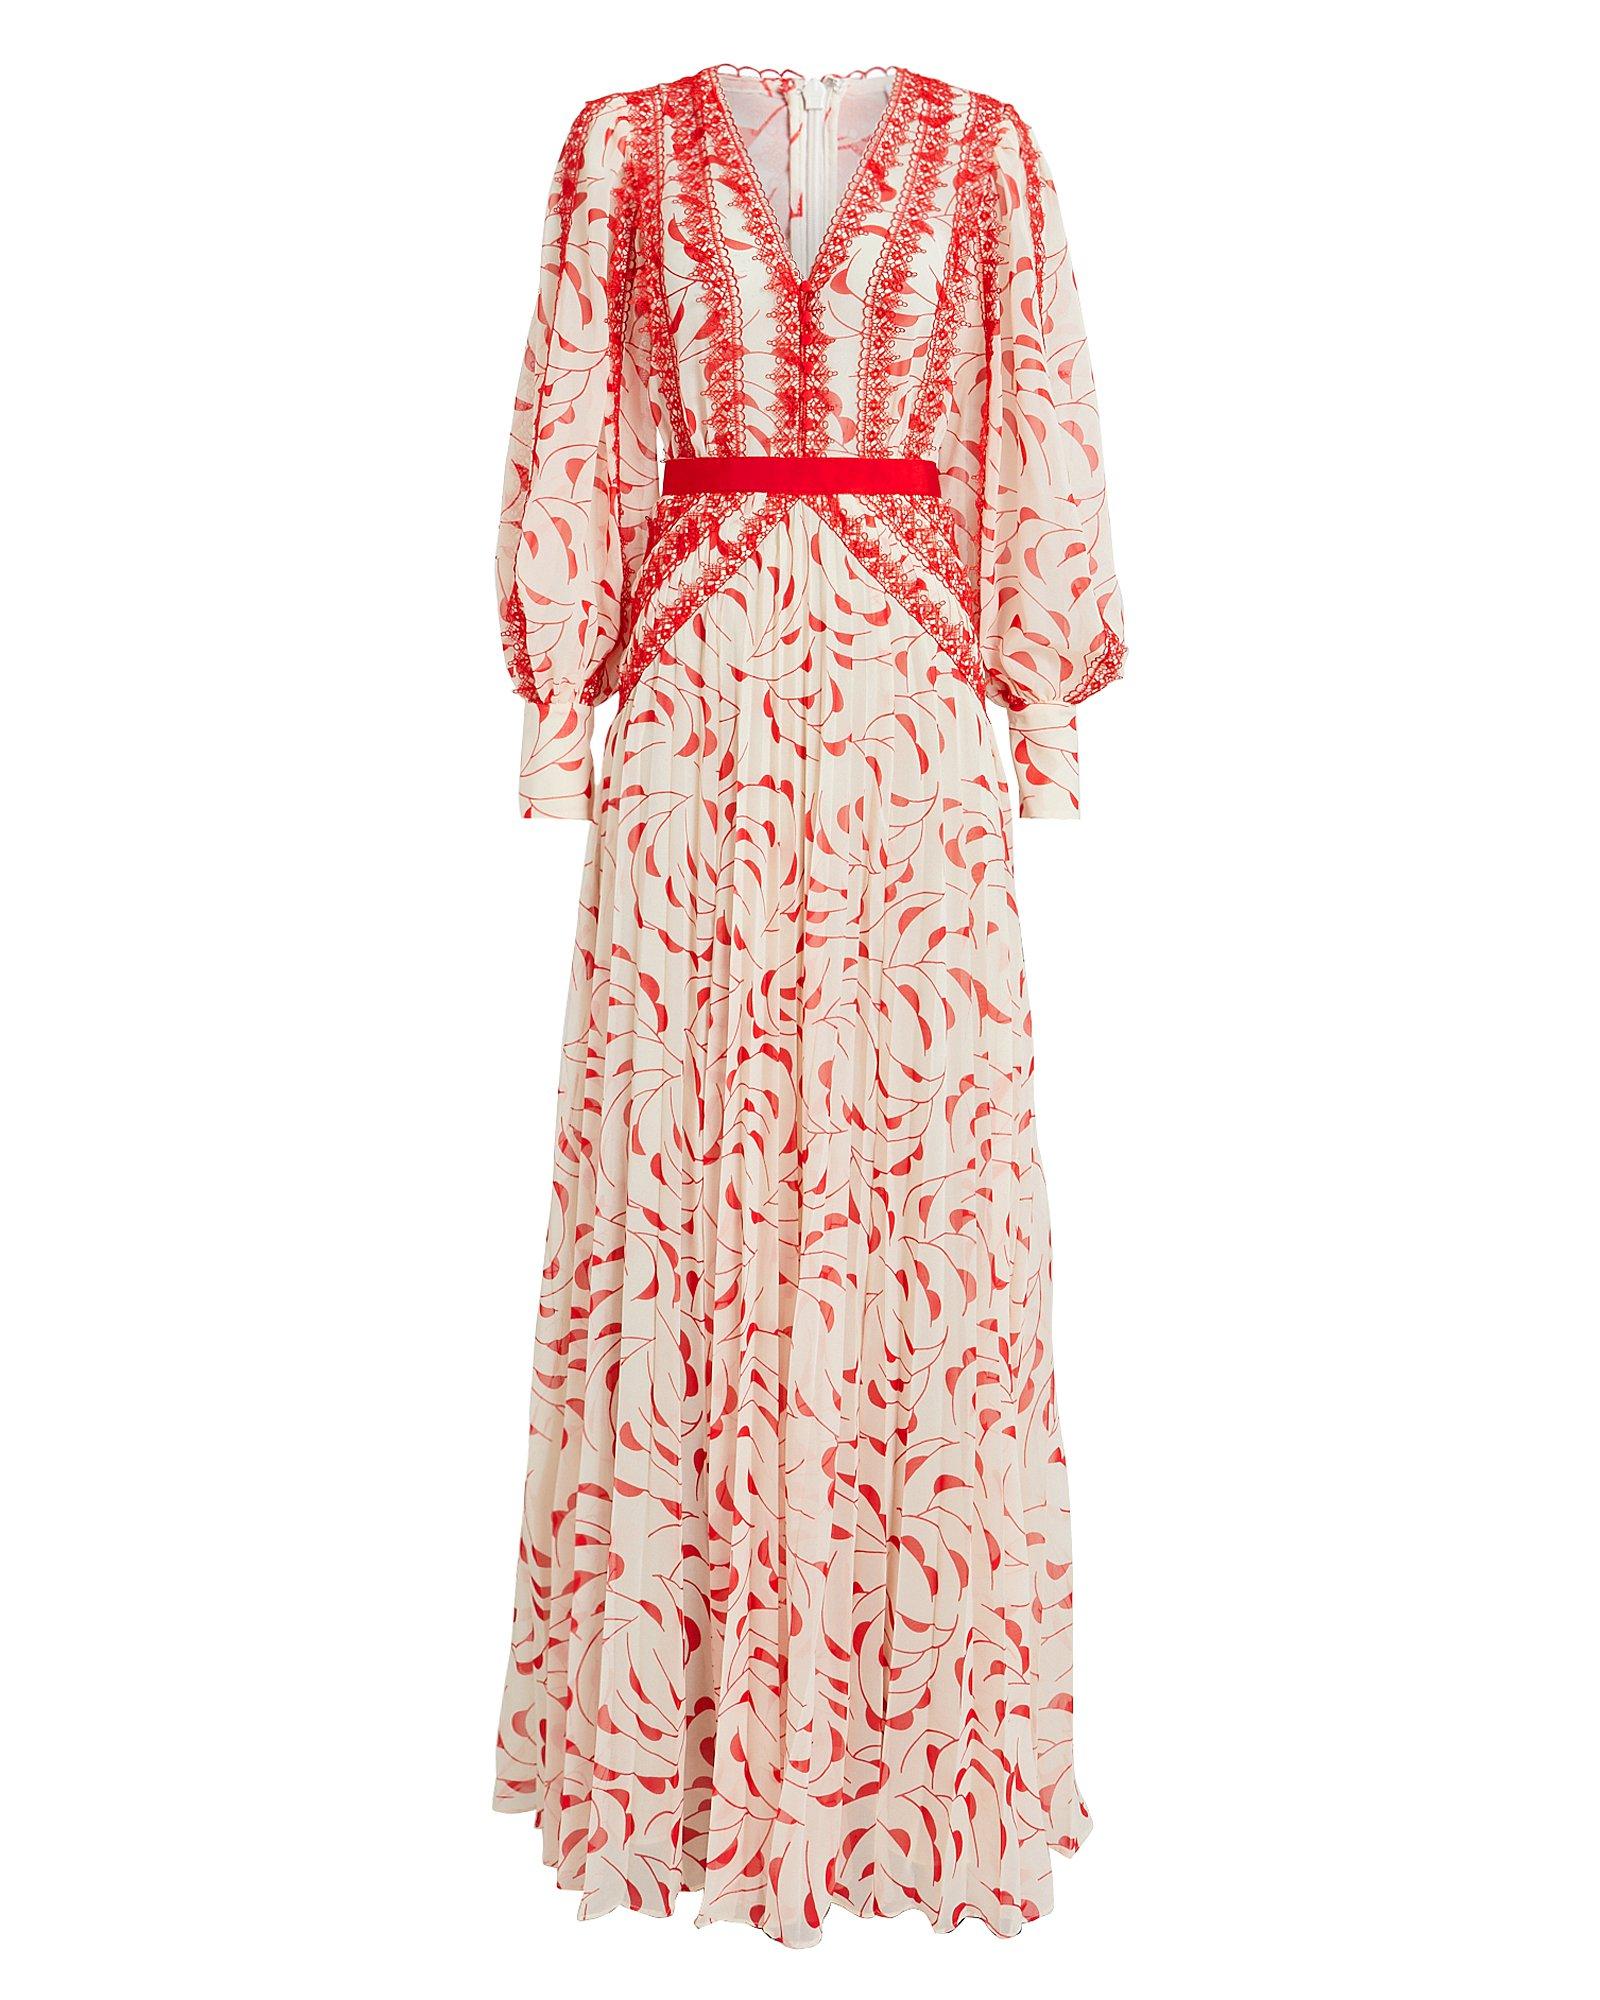 self portrait red embroidered maxi dress